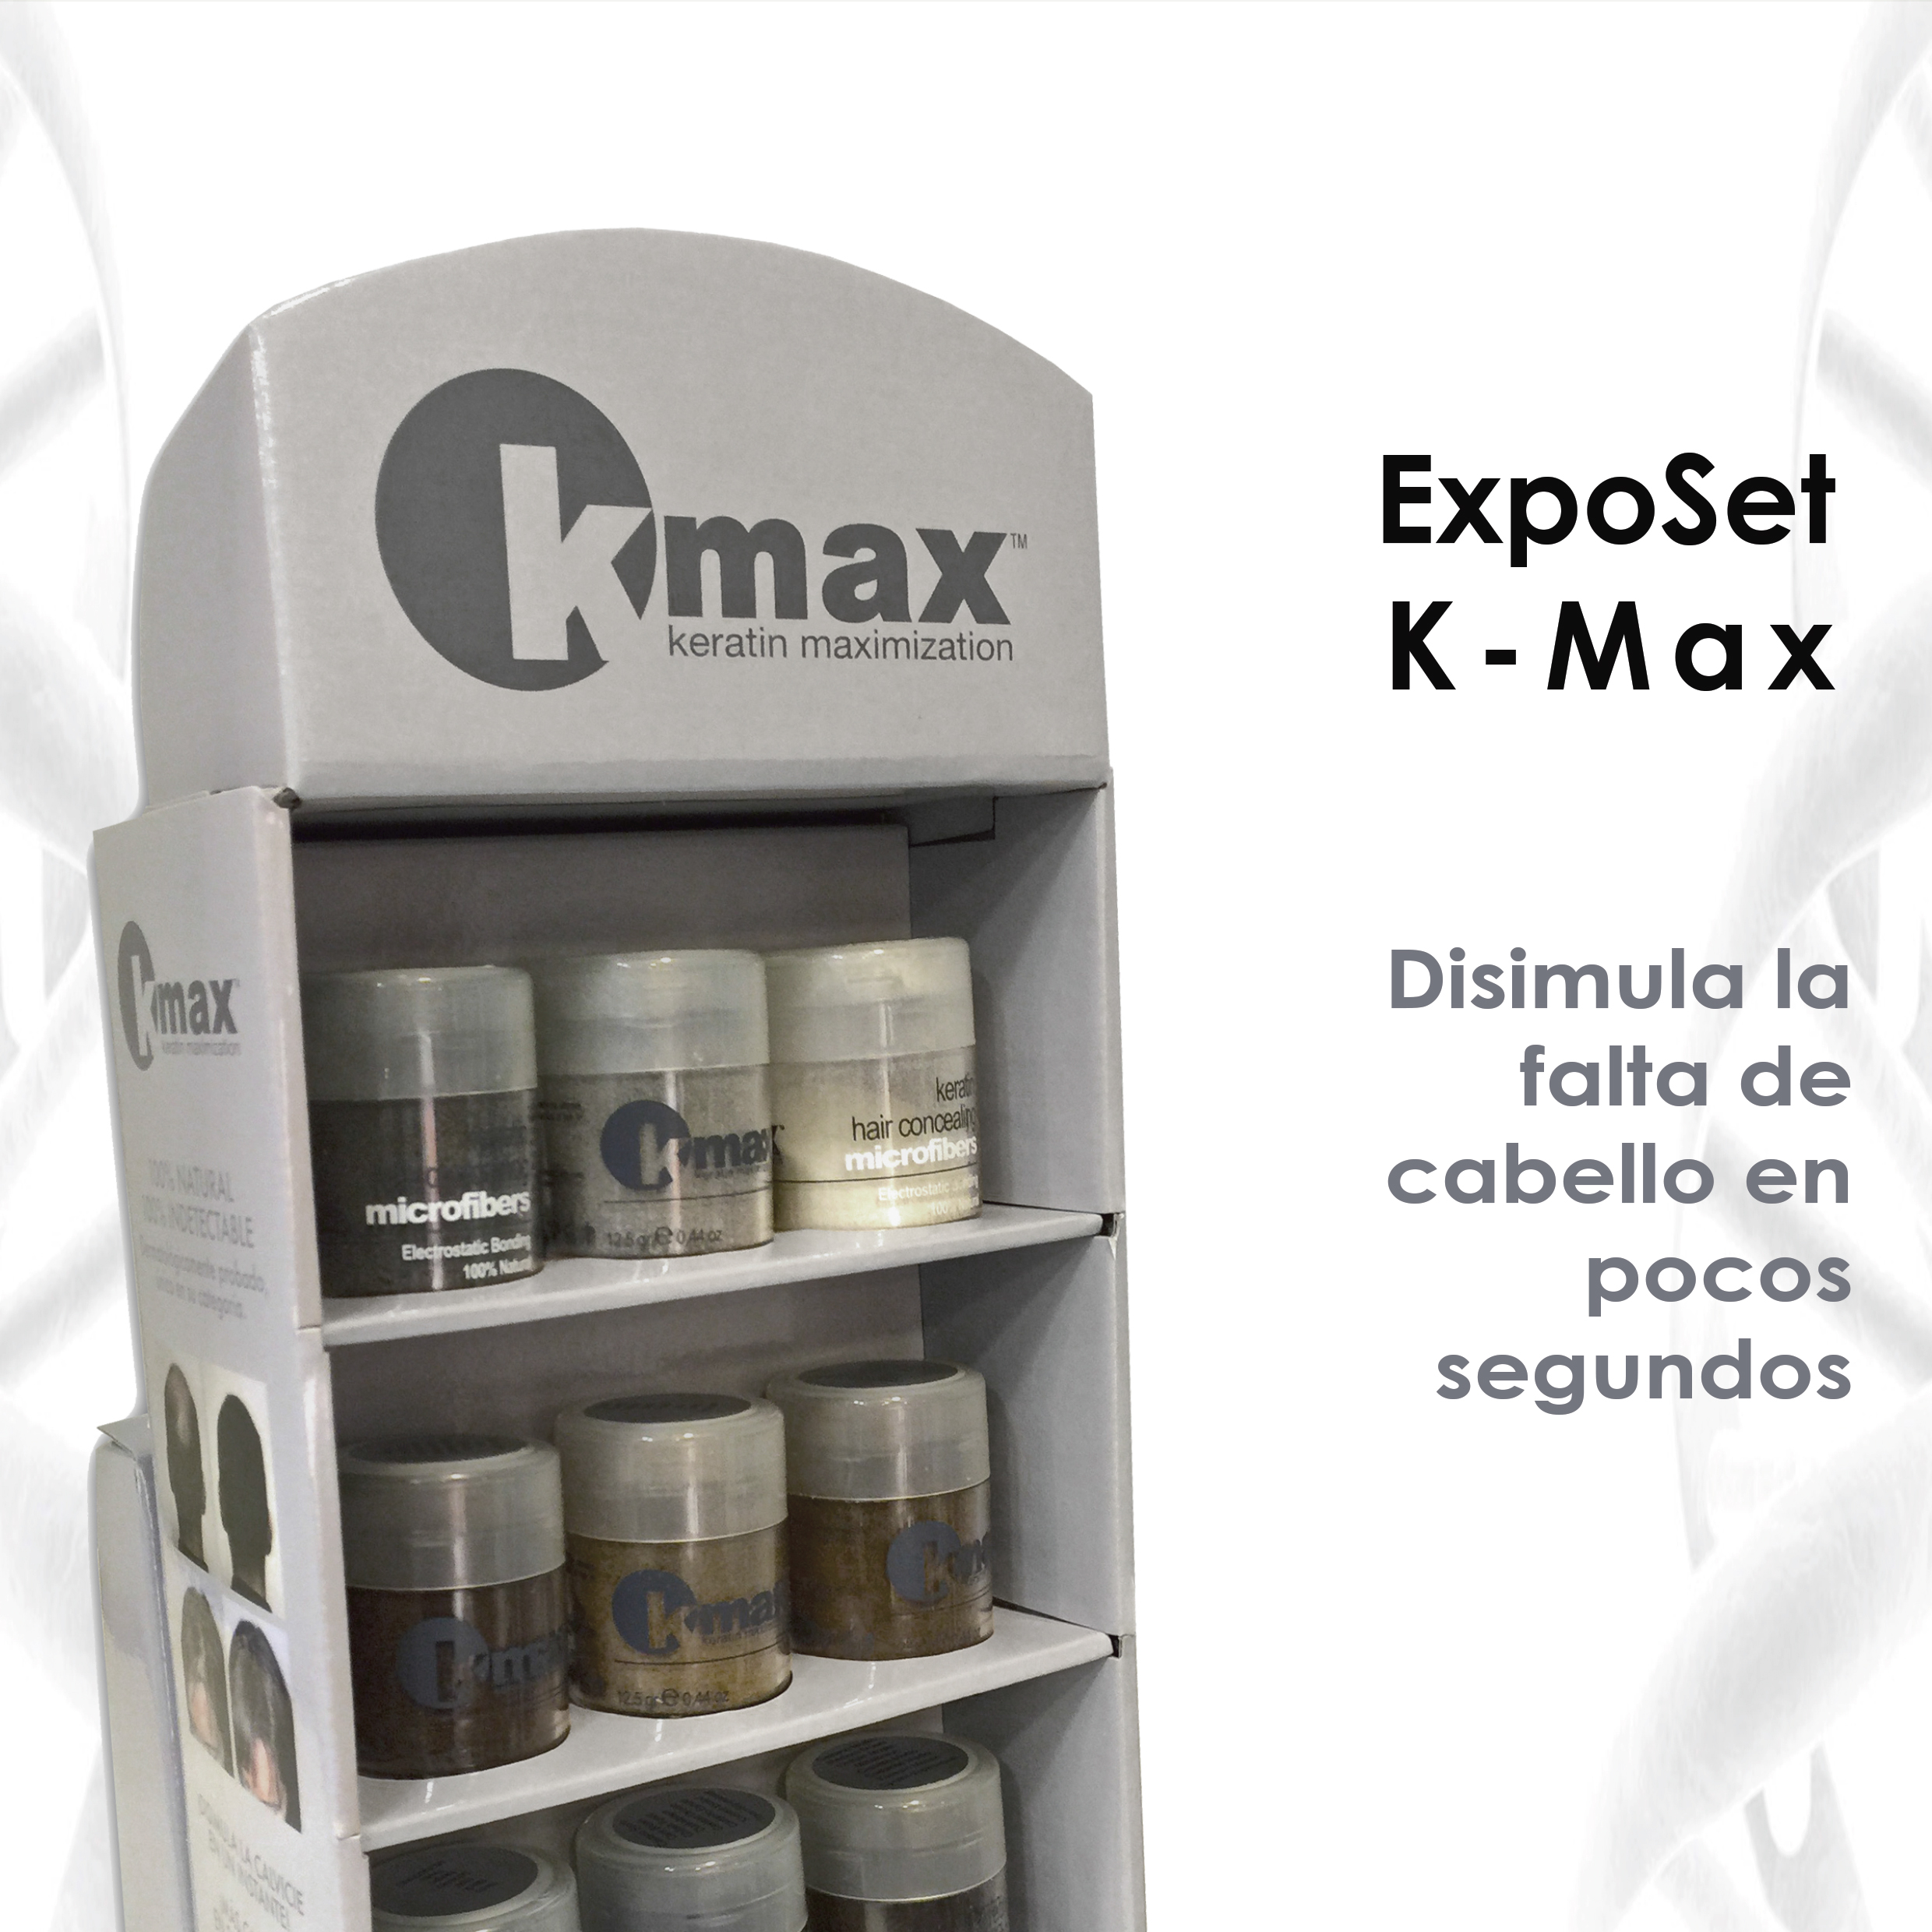 Expositor Productos Kmax